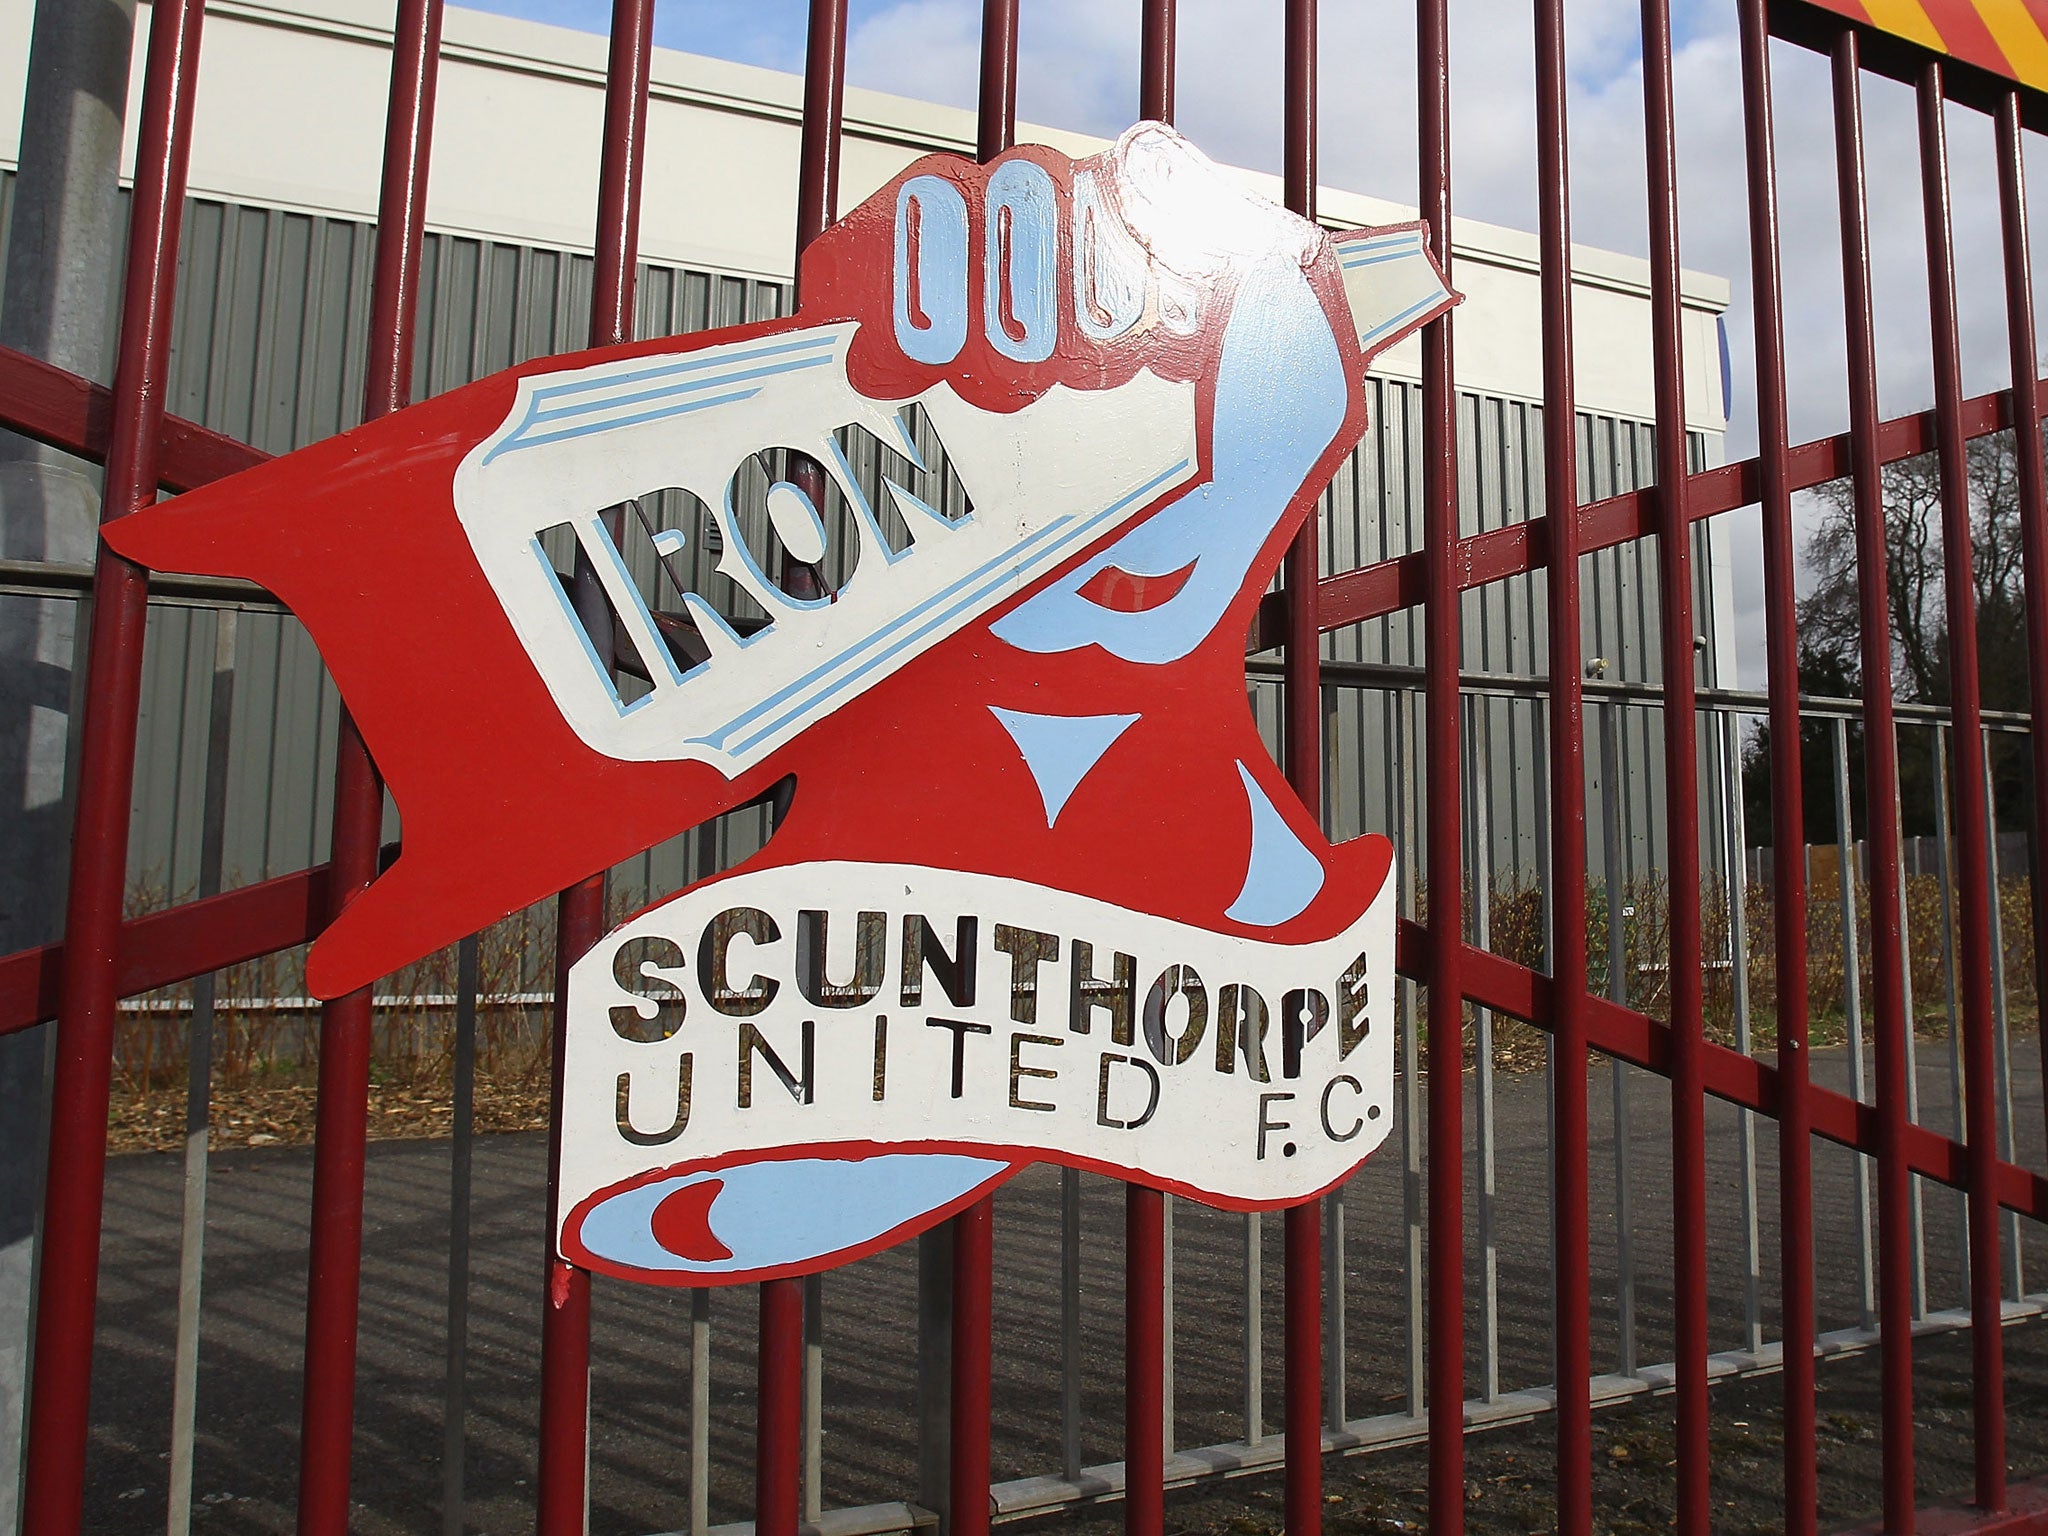 The gates at Glanford Park, home of Scunthorpe United